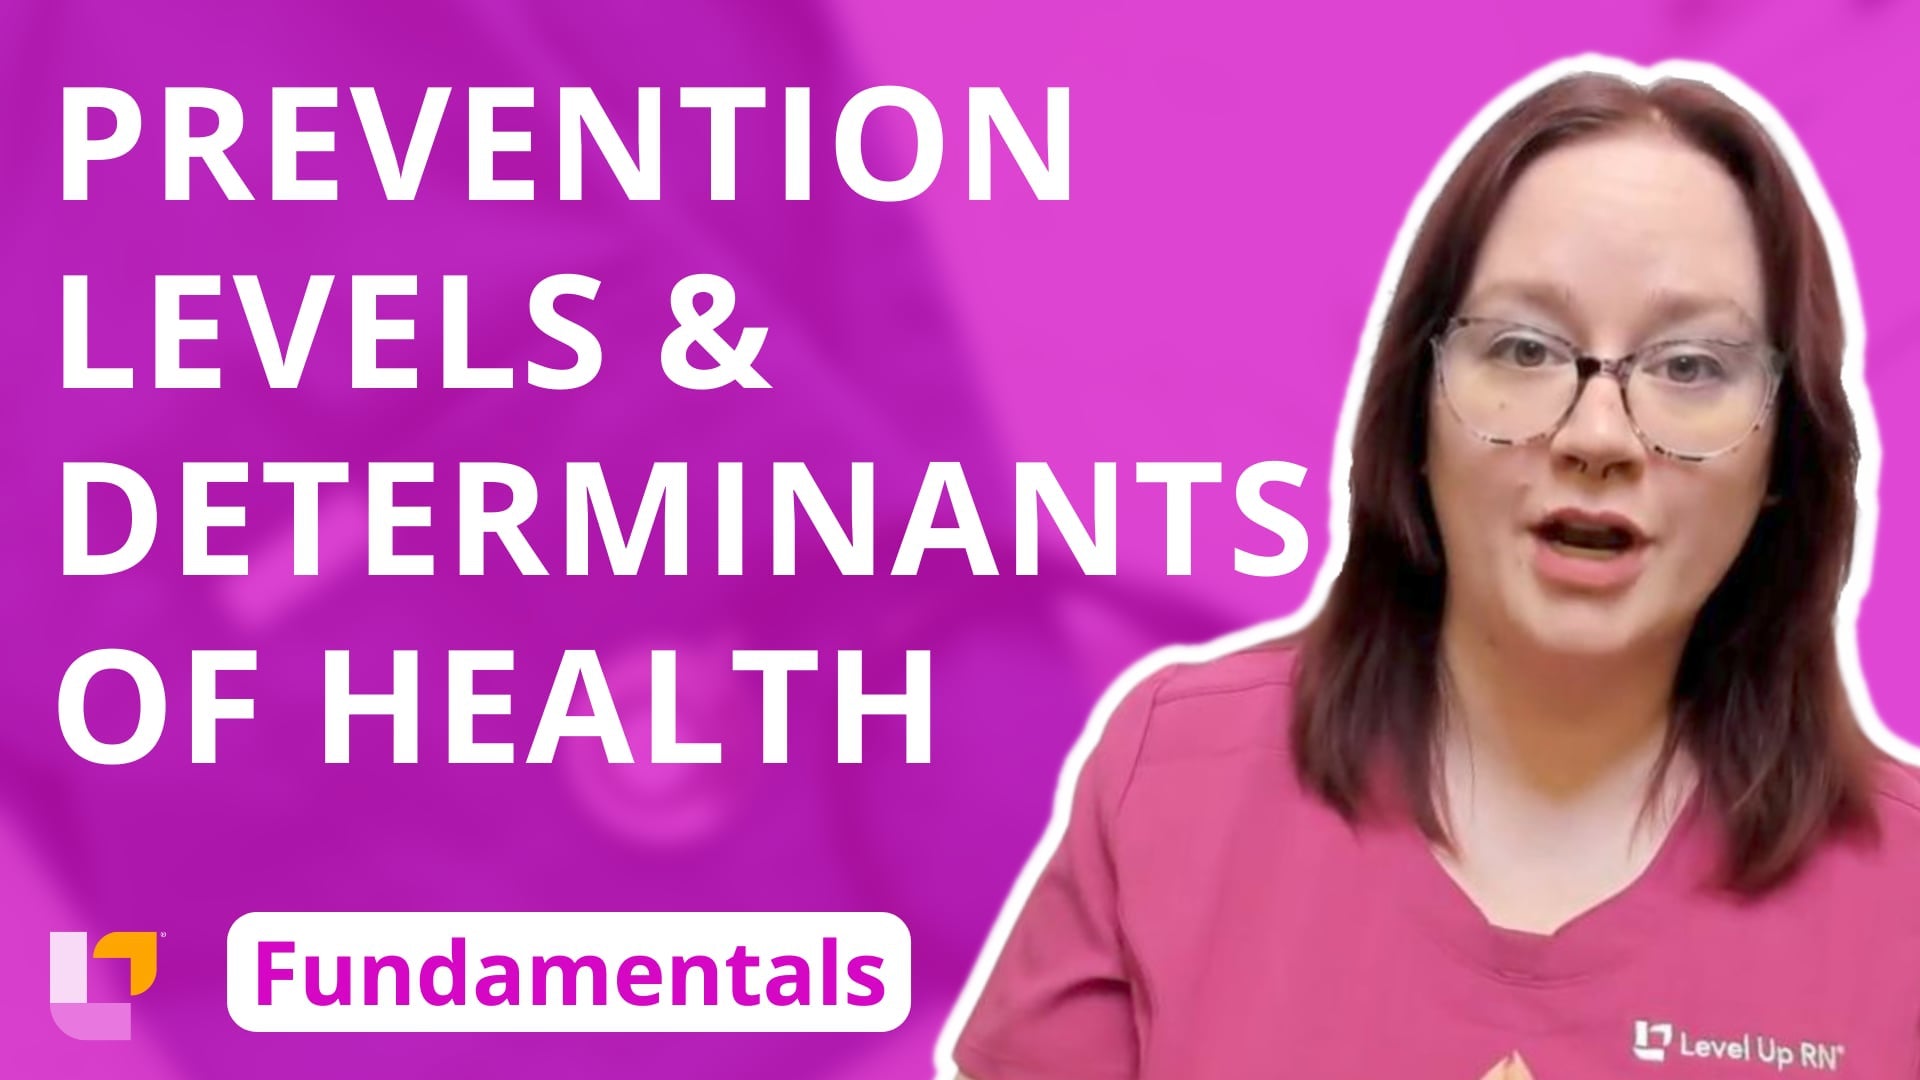 Fundamentals - Community Health, part 2: Prevention Levels and Determinants of Health - LevelUpRN